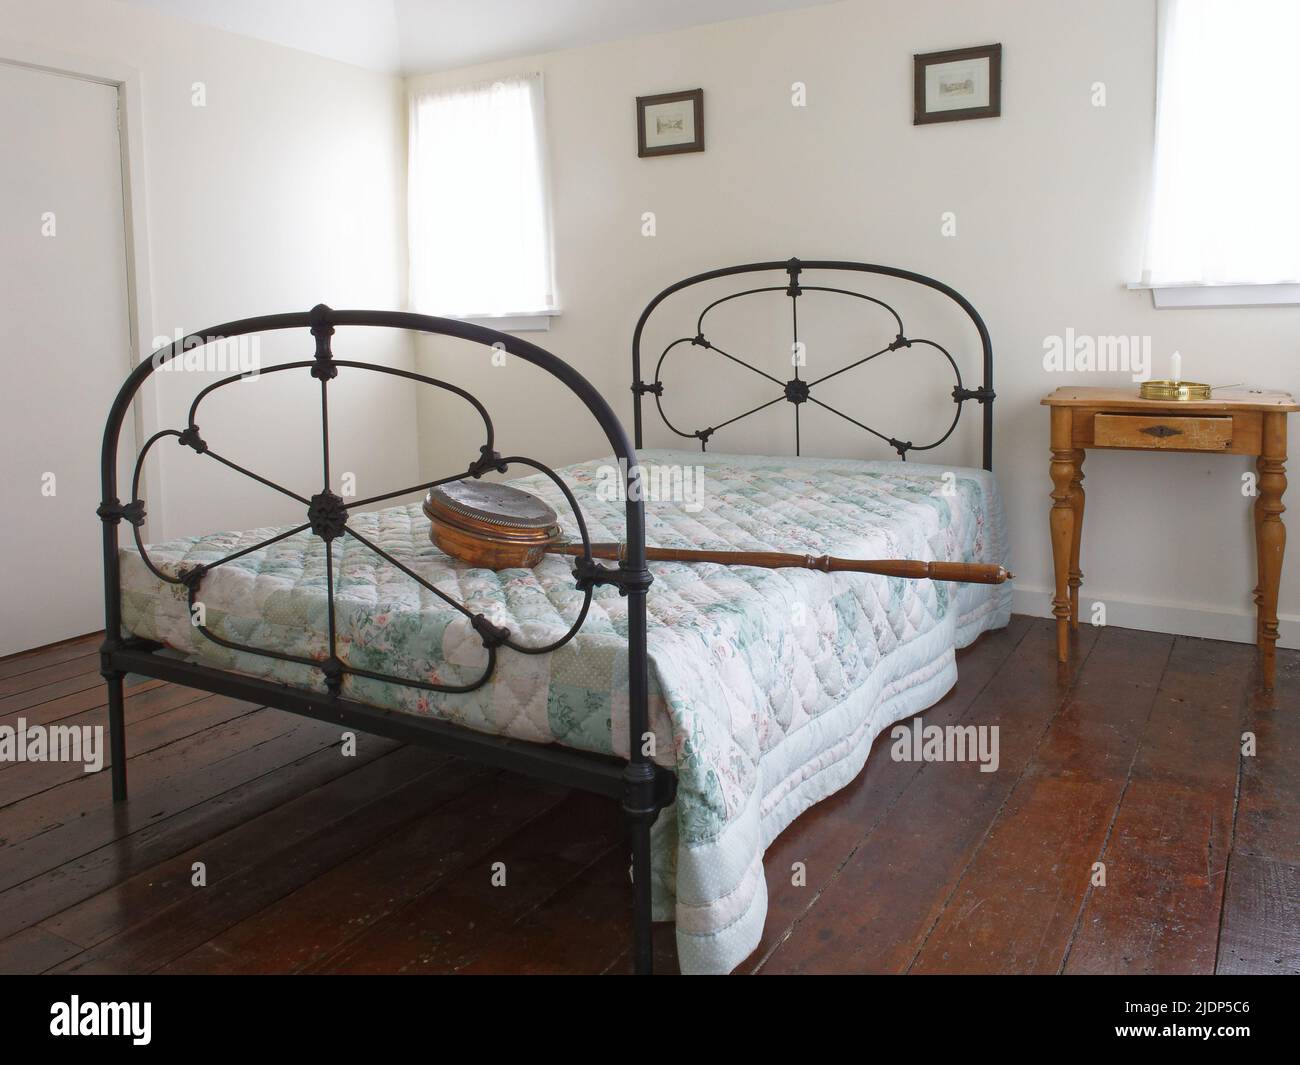 A copper bed warming pan with a long wooden handle lying across a double bed with iron bedstead. Stock Photo